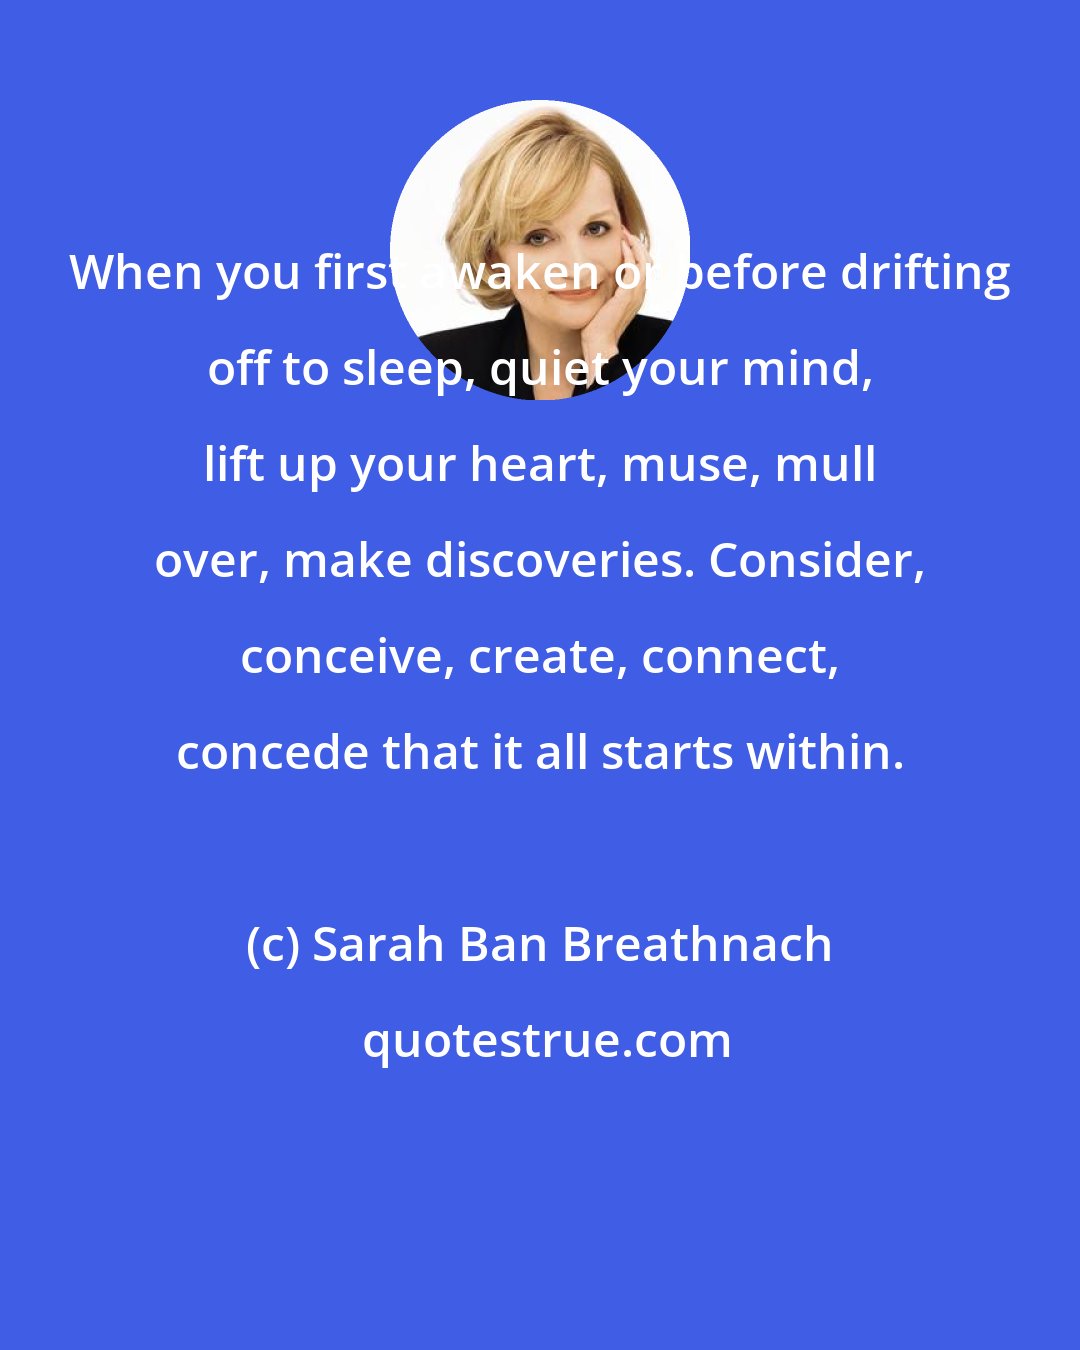 Sarah Ban Breathnach: When you first awaken or before drifting off to sleep, quiet your mind, lift up your heart, muse, mull over, make discoveries. Consider, conceive, create, connect, concede that it all starts within.